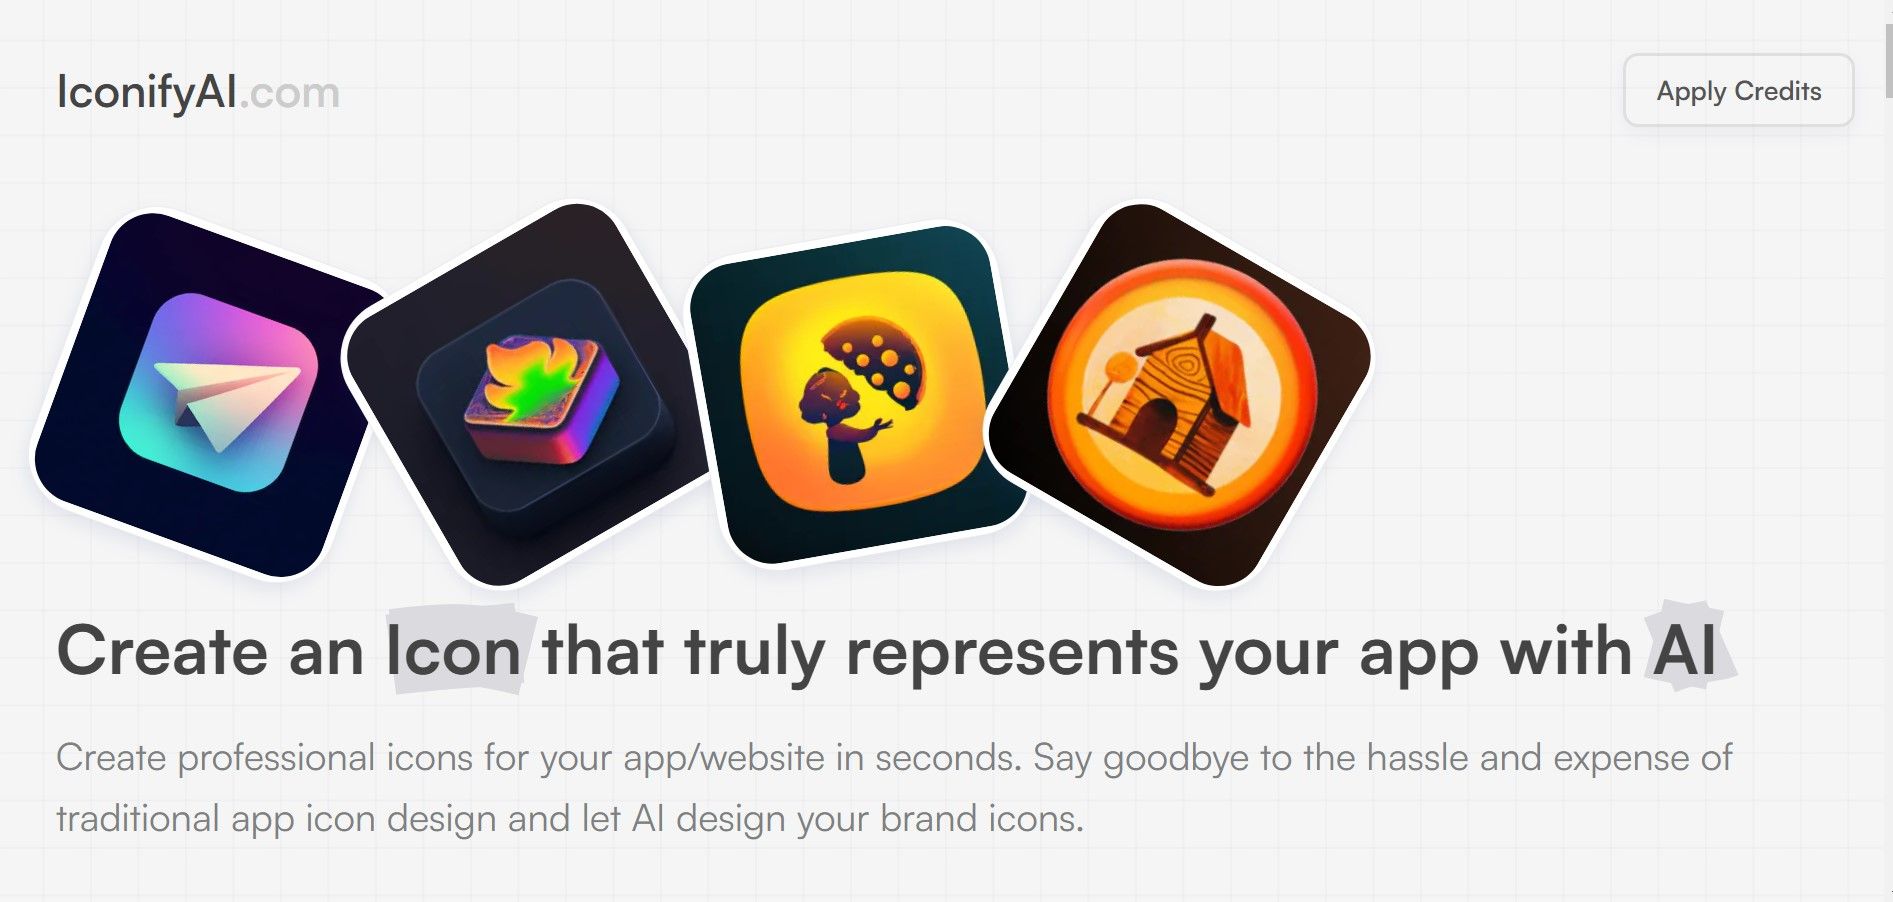 Iconify AIThis service allows users to quickly create professional icons